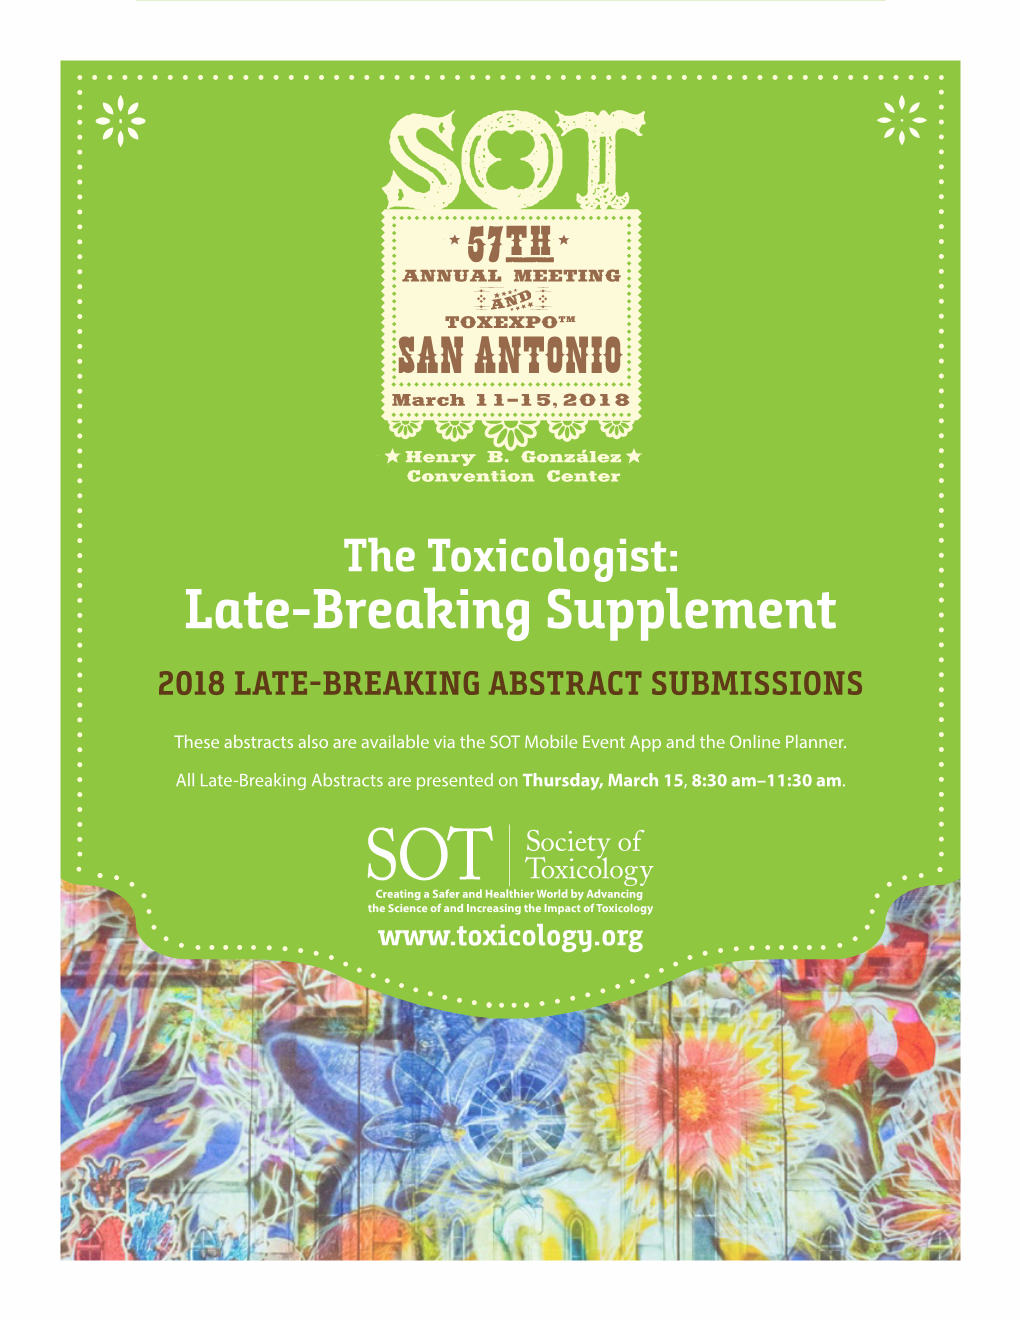 The Toxicologist: Late-Breaking Supplement 2018 LATE-BREAKING ABSTRACT SUBMISSIONS